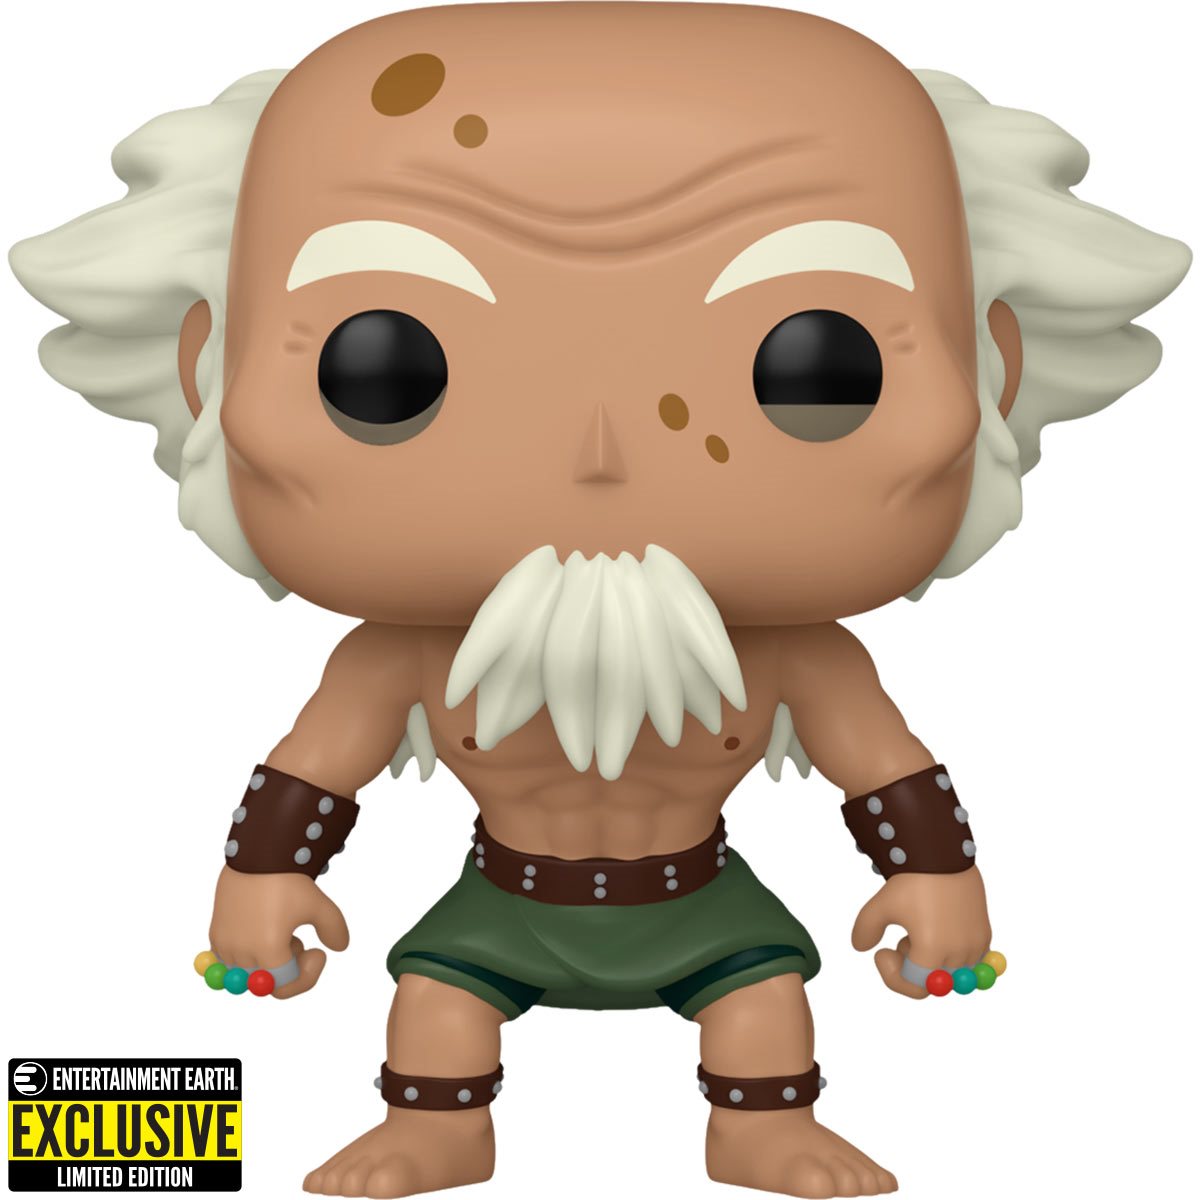 King Bumi Avatar the Last Airbender EE exclusive Pop!